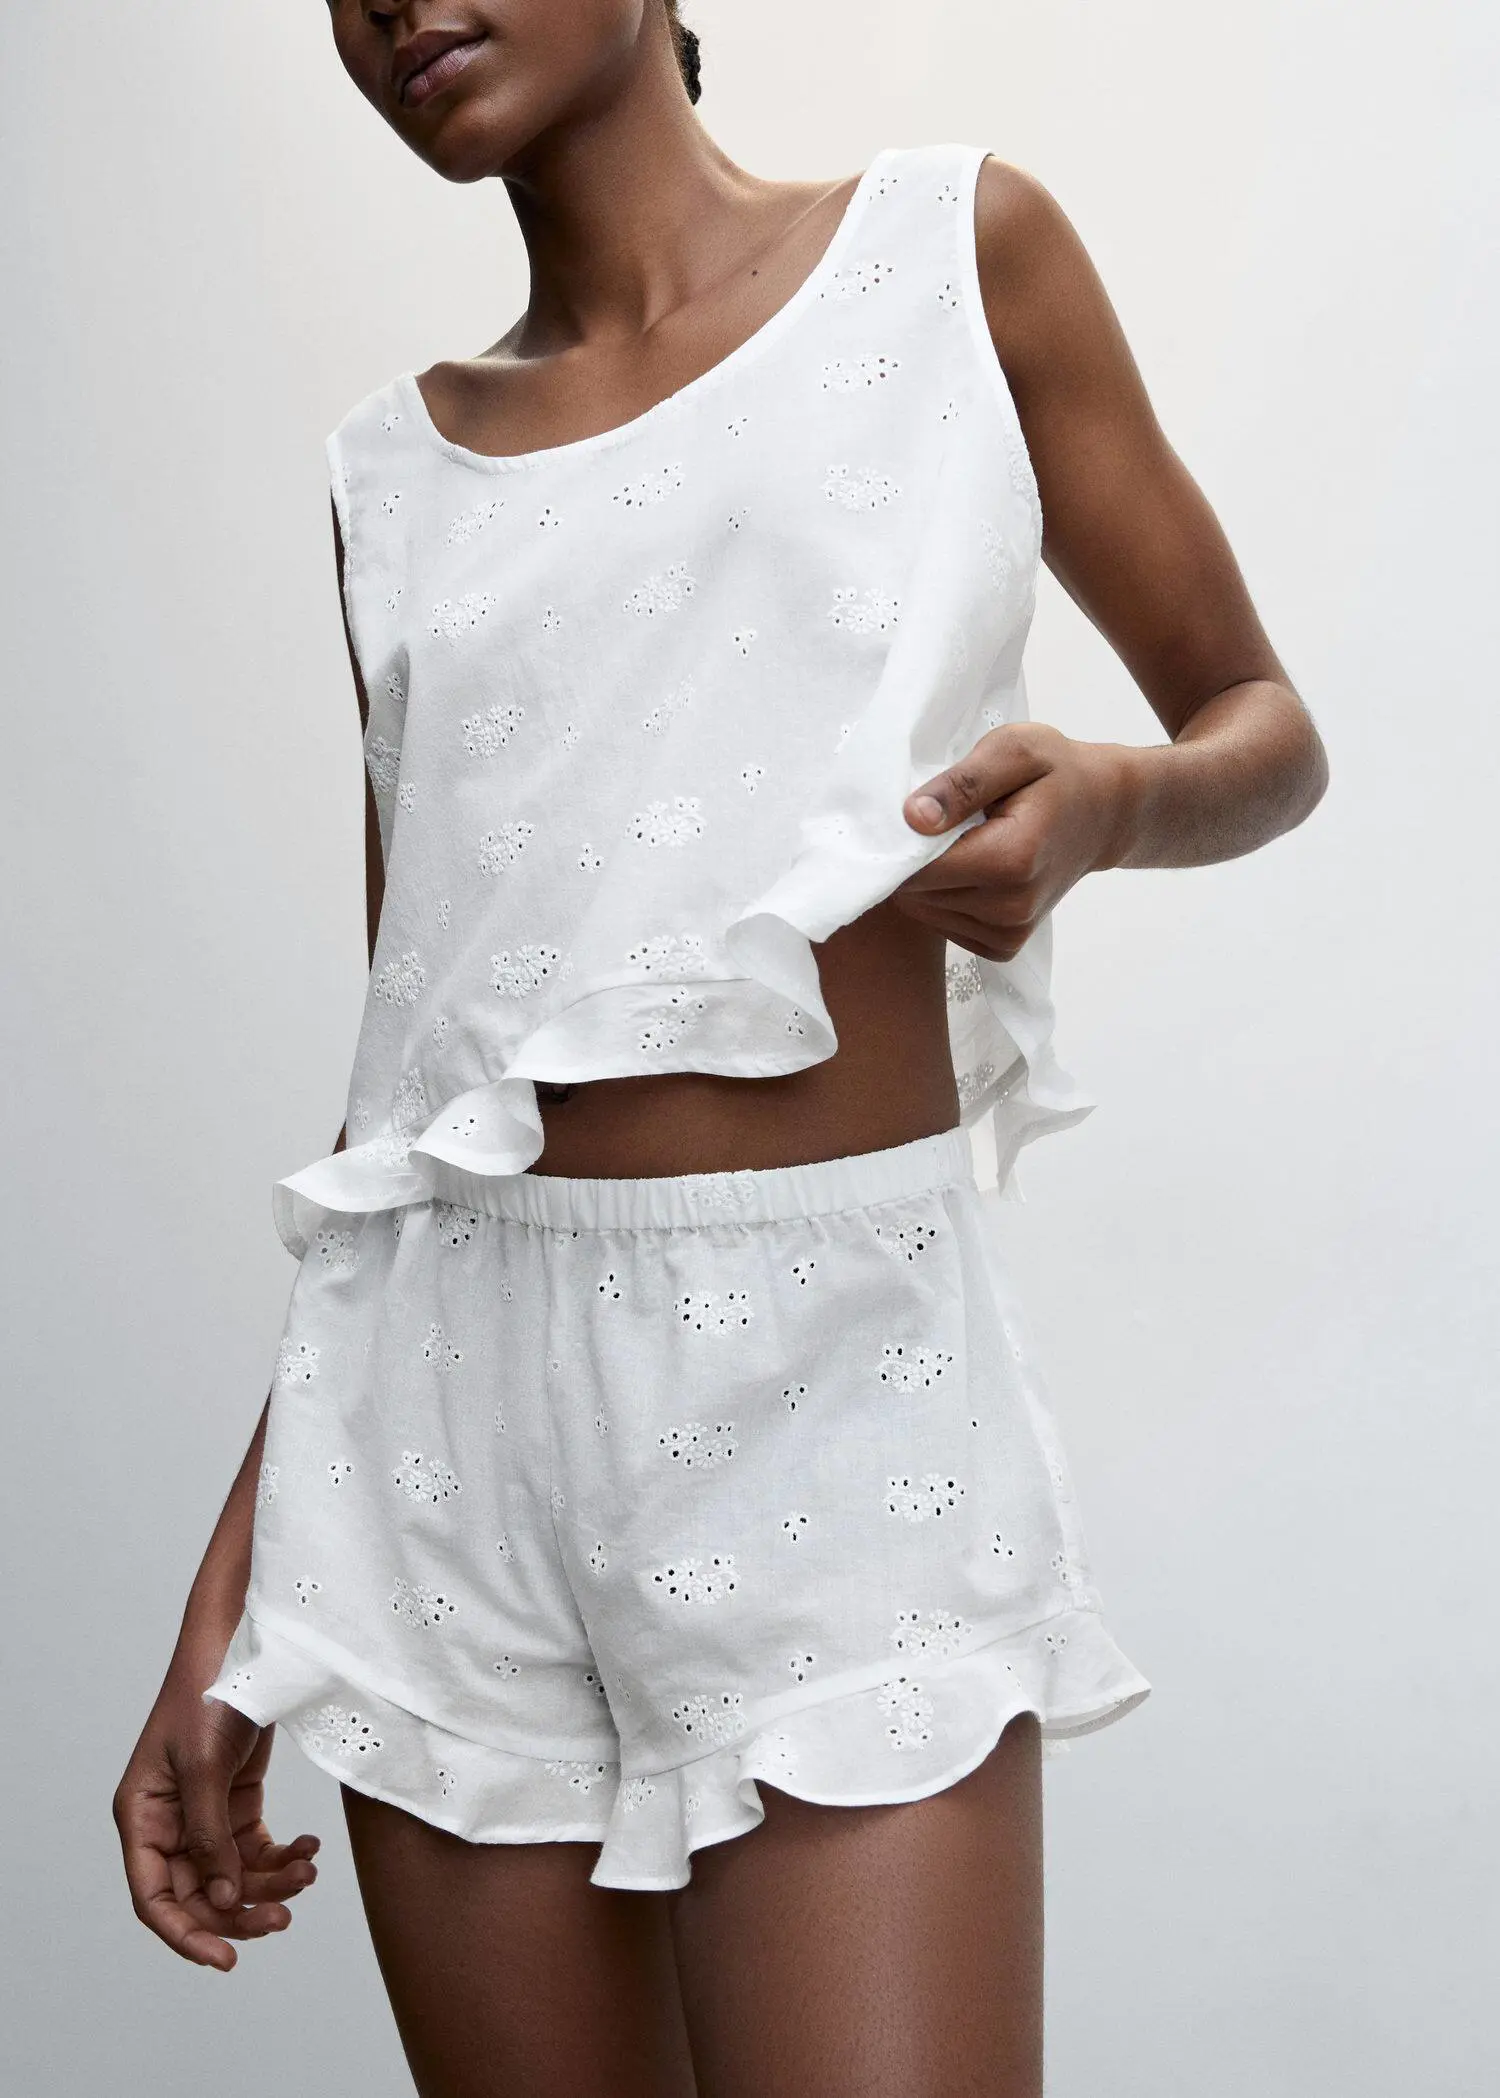 Mango Pyjama shorts with openwork detail. a woman in white shorts and a tank top. 